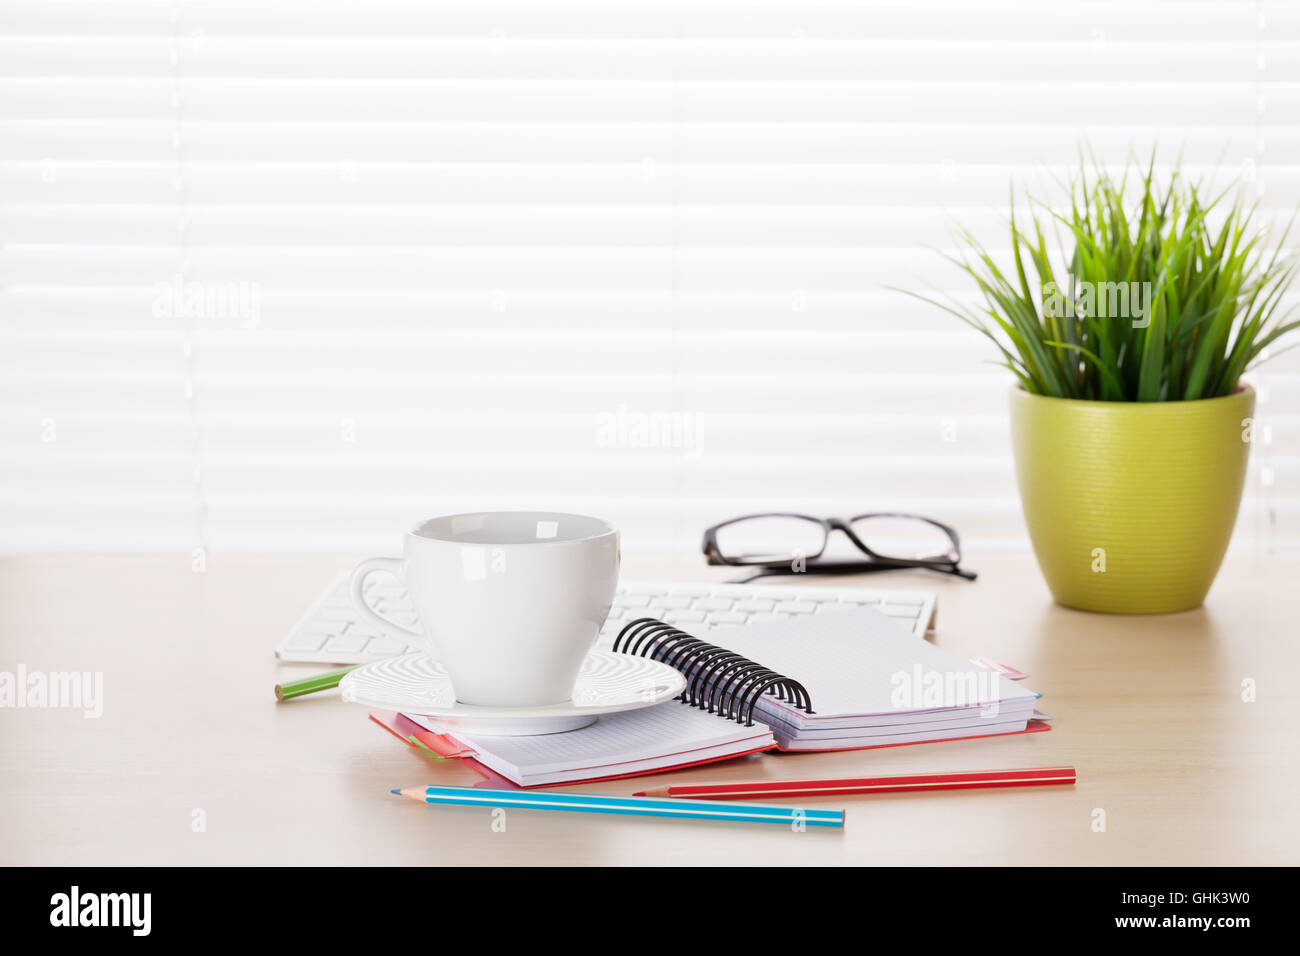 Office workplace with coffee, pc and plant on wooden desk table in front of window with blinds Stock Photo